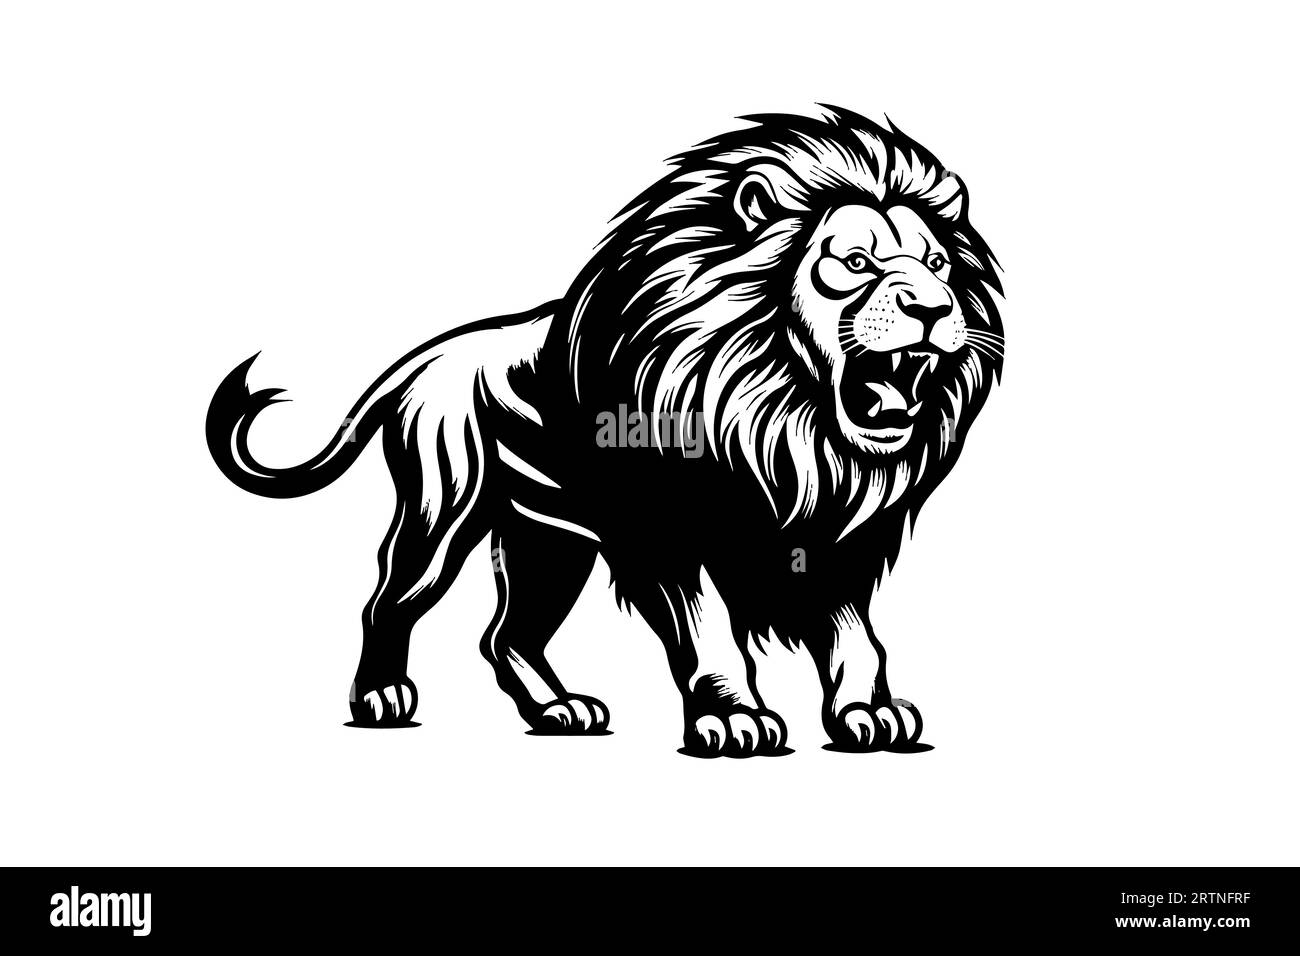 Lion Hand drawn illustration for tattoo , logotype, emblem design. Engraving of wild cat. Vintage sketch style image. Stock Vector